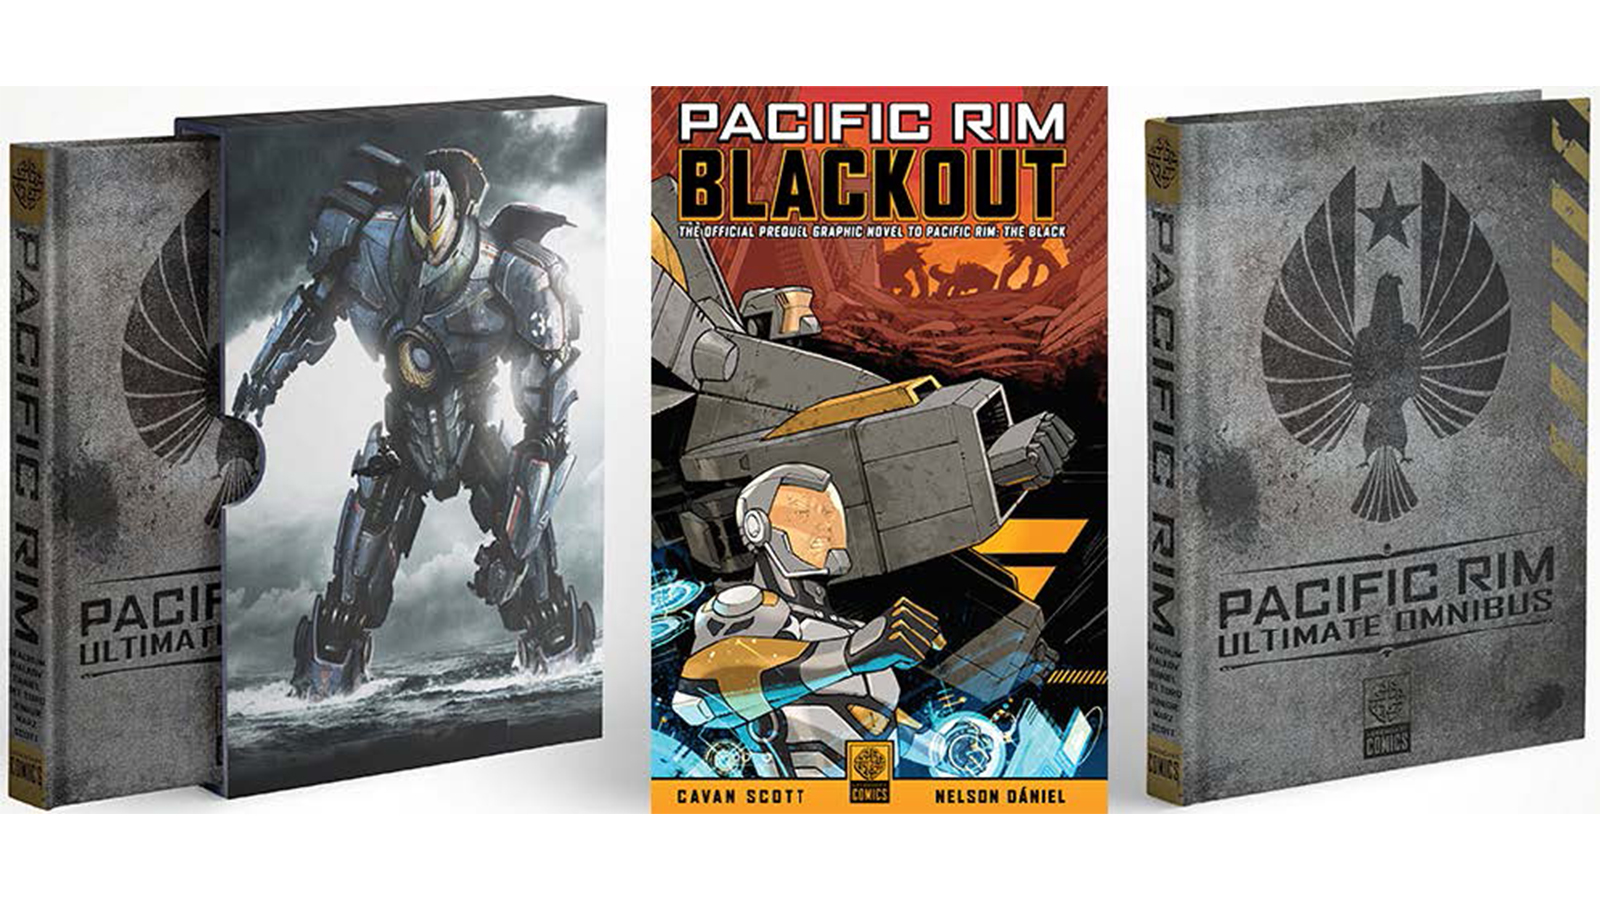 Legendary Comics Announces New Anime Companion Graphic Novel Pacific Rim:  Blackout, Revealing the Cover, and a New Pacific Rim: Ultimate Omnibus  Collection | Legendary